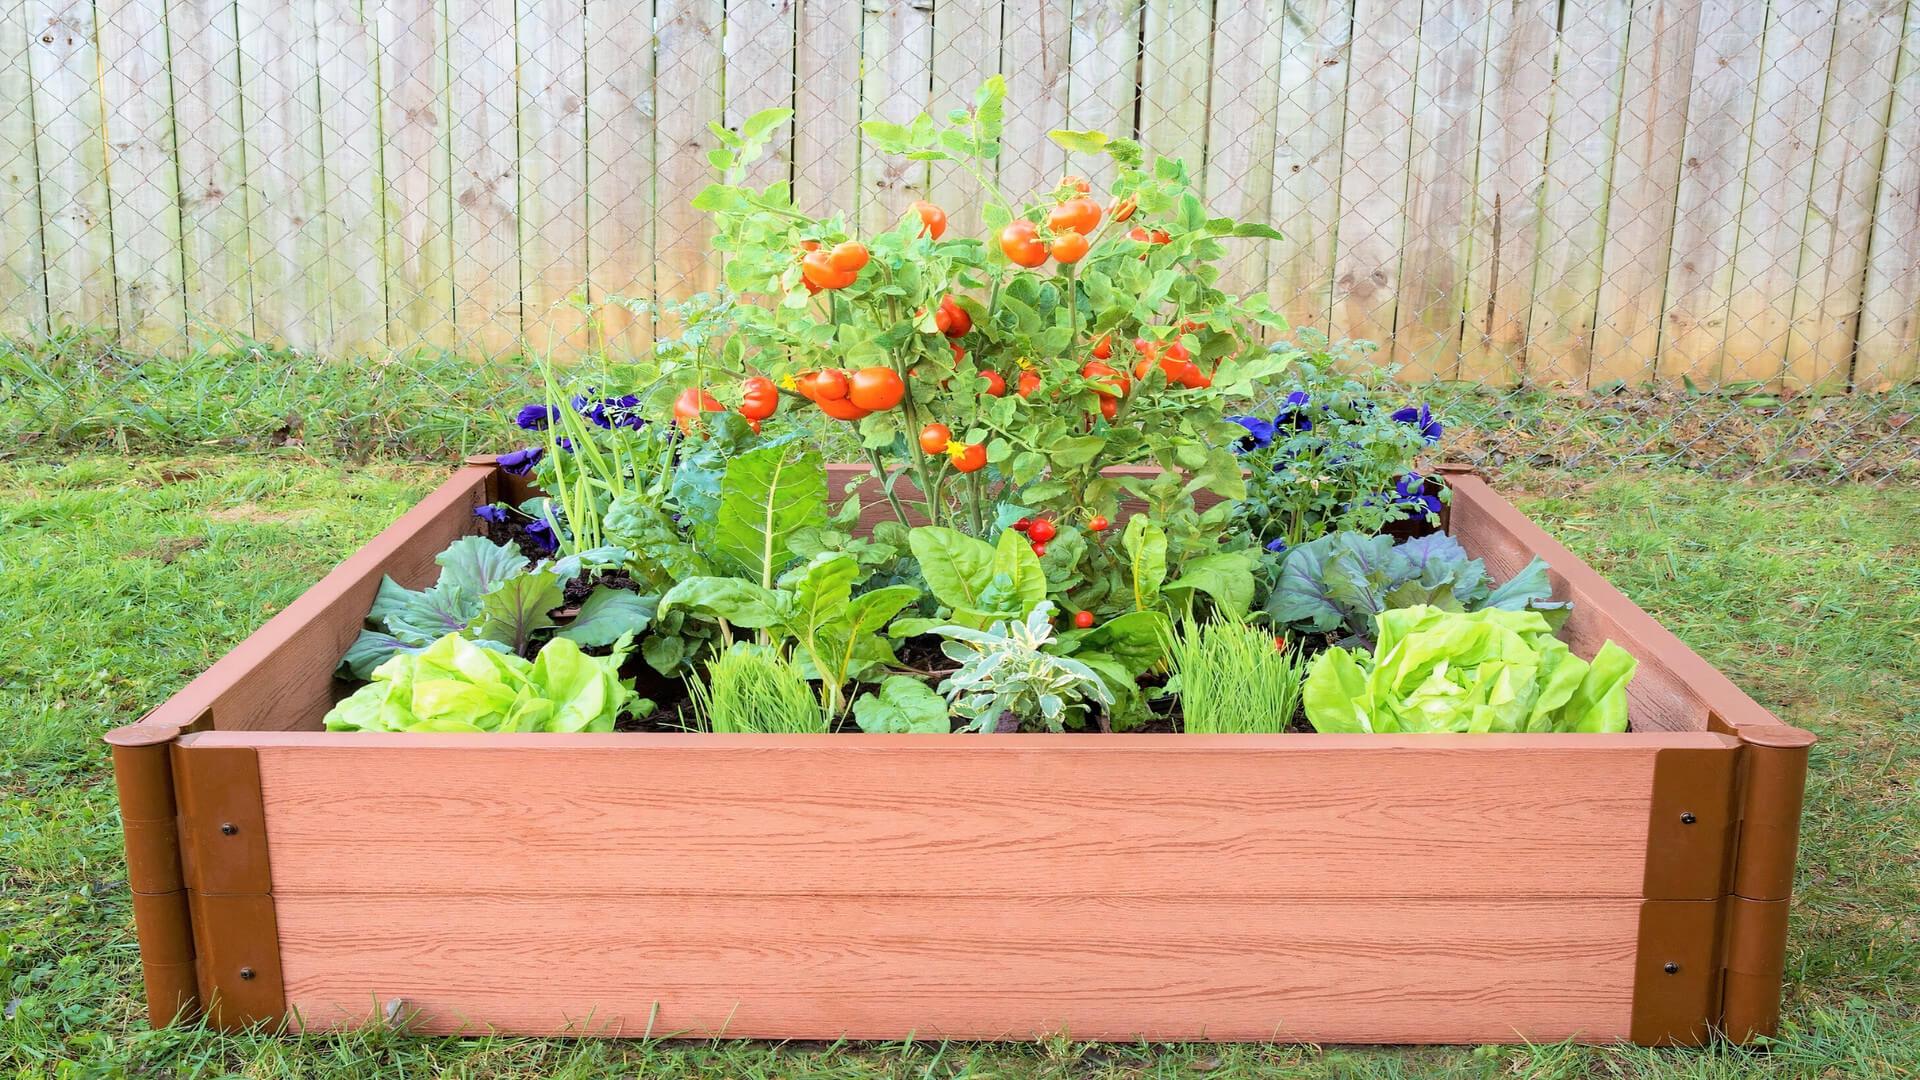 Tool-Free 4' x 4' Raised Garden Bed Raised Garden Beds Frame It All Classic Sienna 2